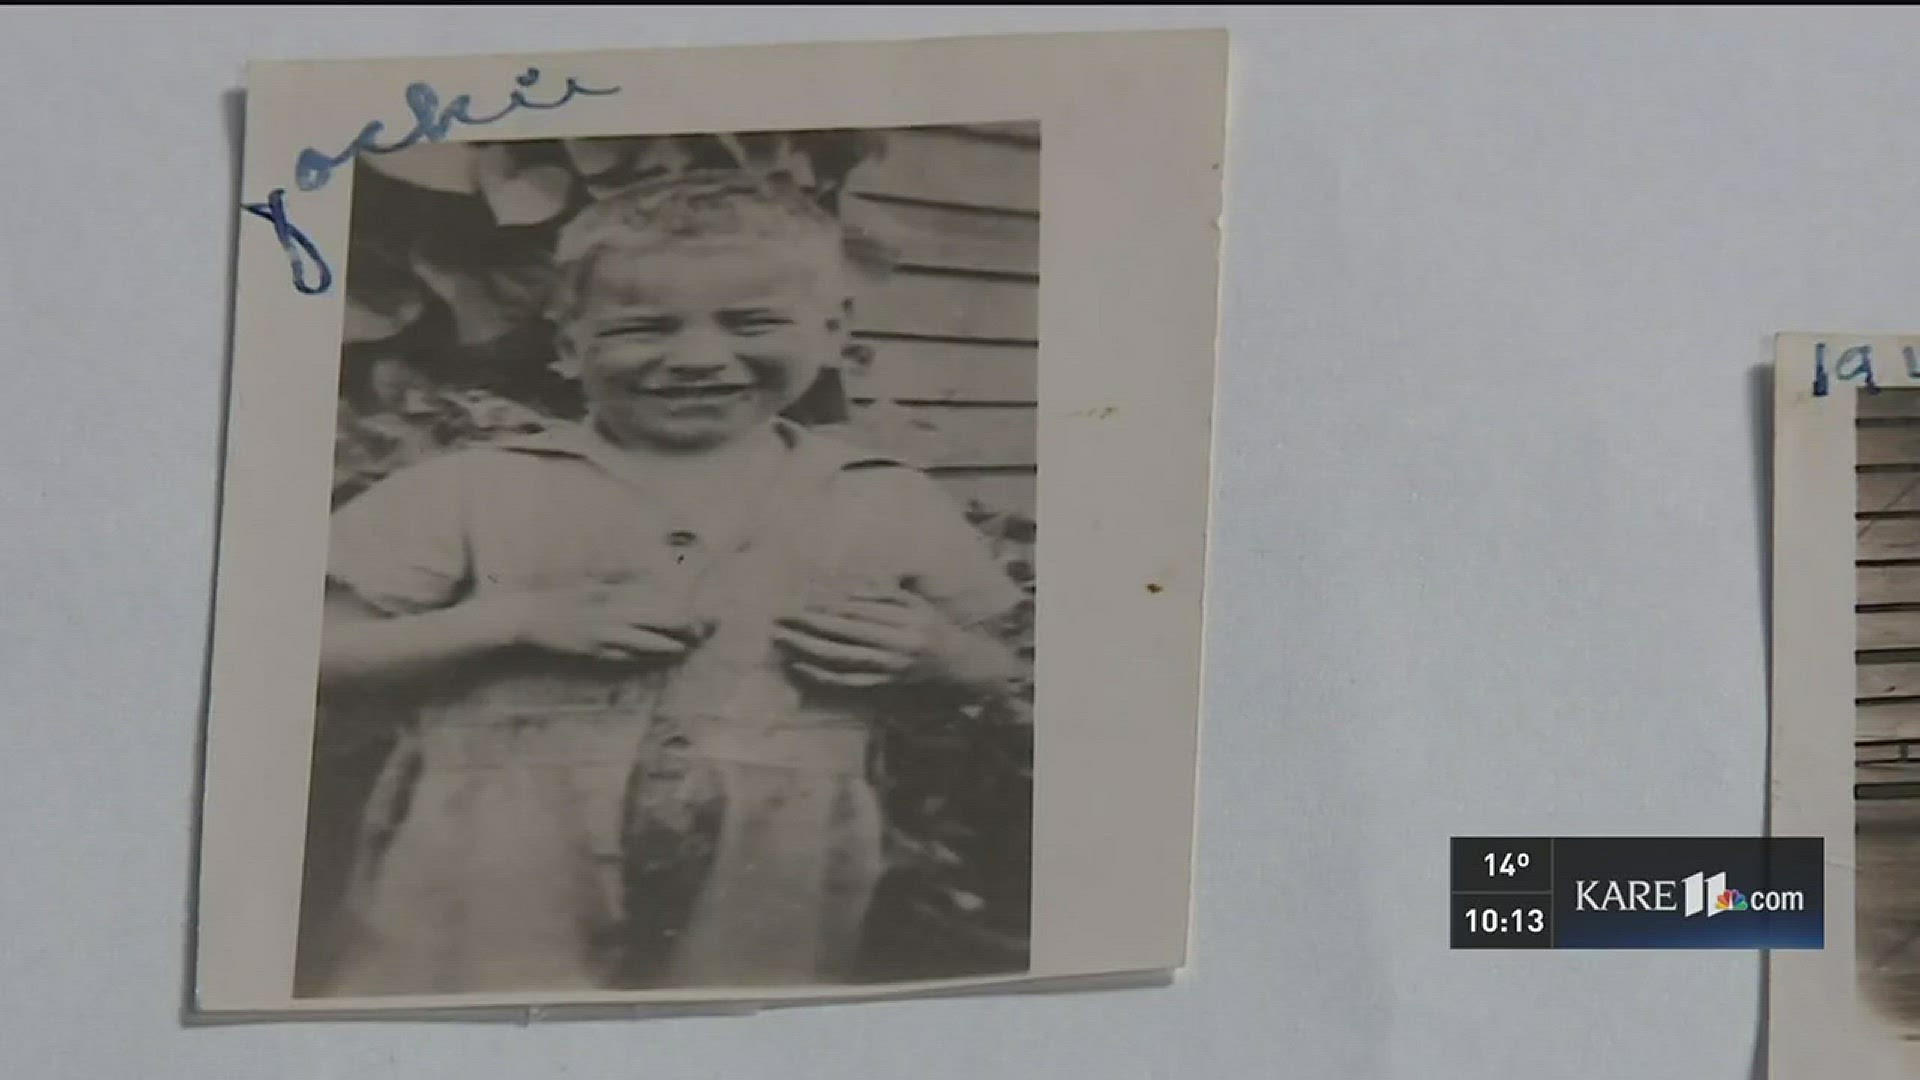 In 1944 six-year-old Jackie Theel never made it home from school. The mystery of where he is still haunts his sister.